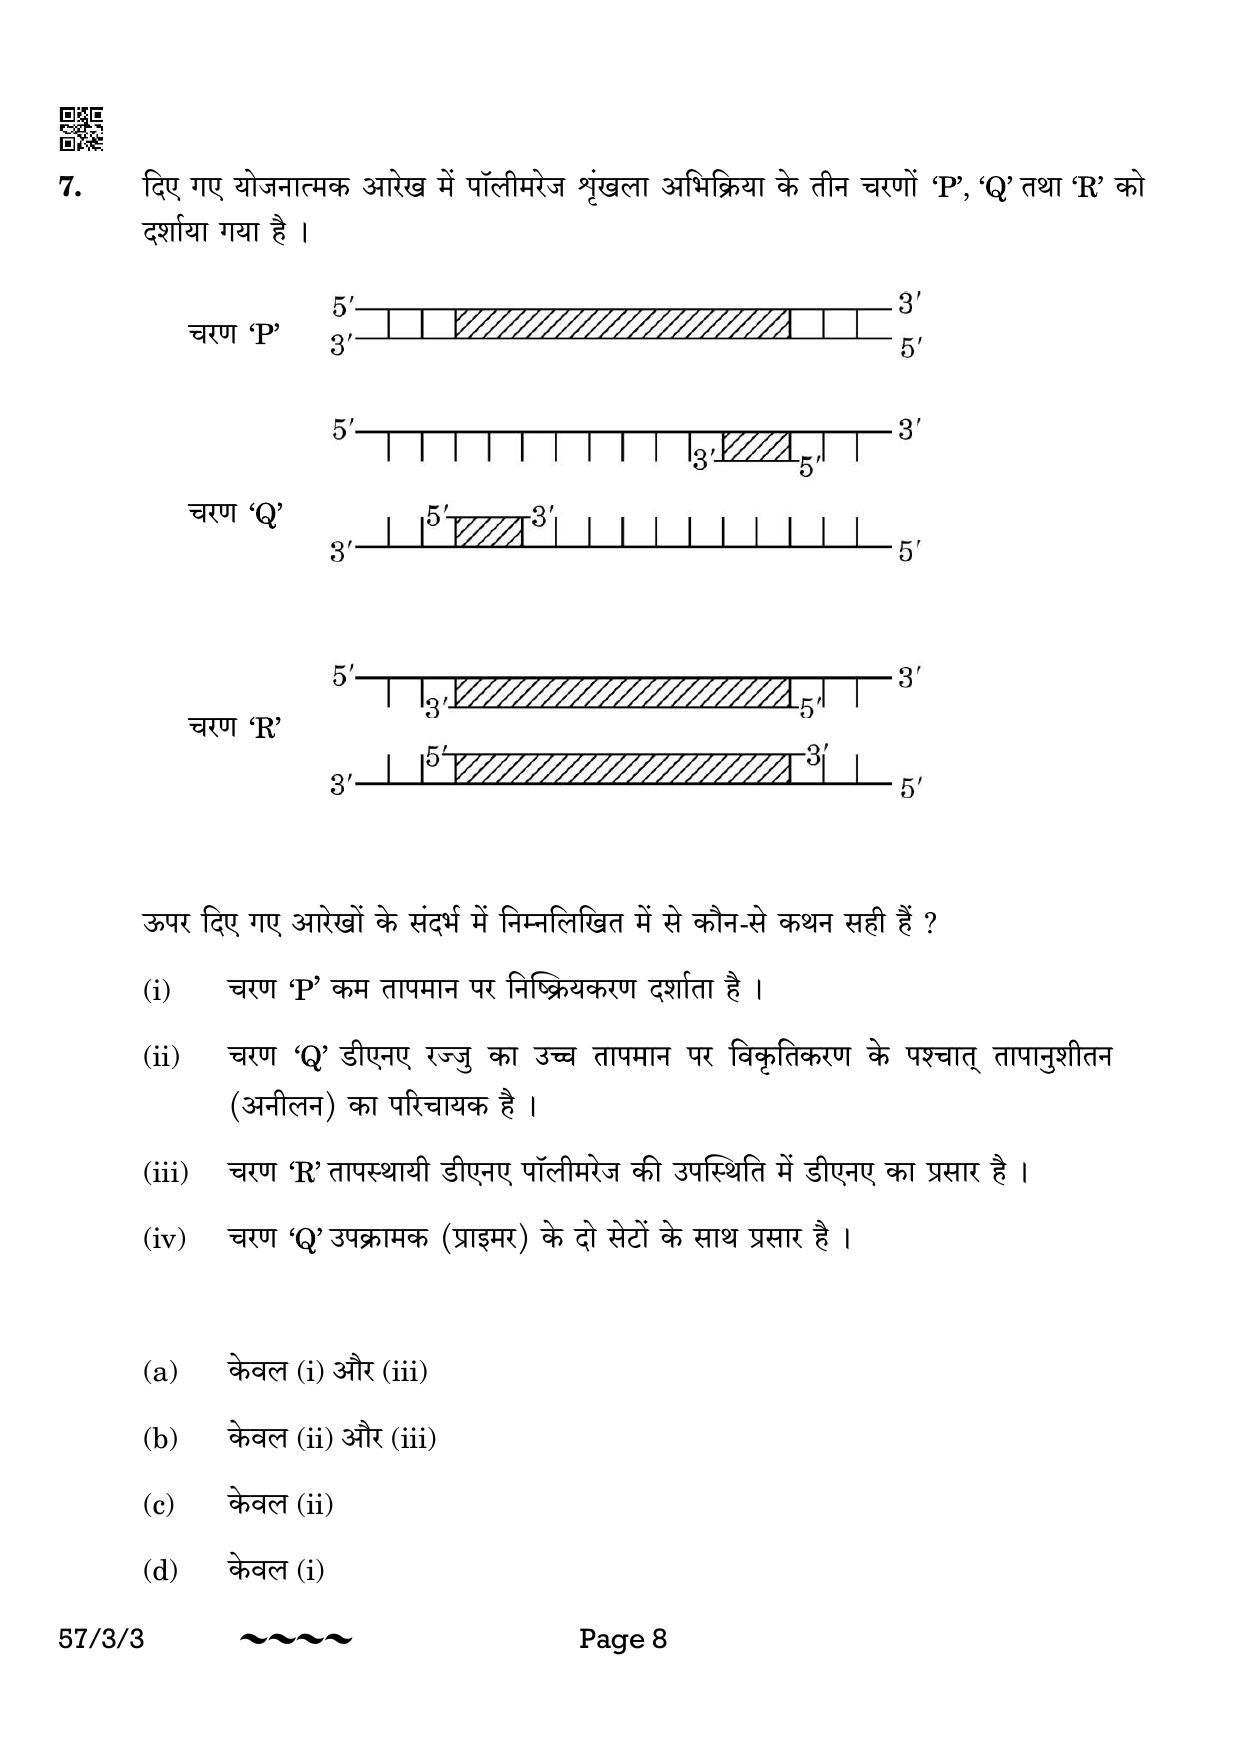 CBSE Class 12 57-3-3 Biology 2023 Question Paper - Page 8